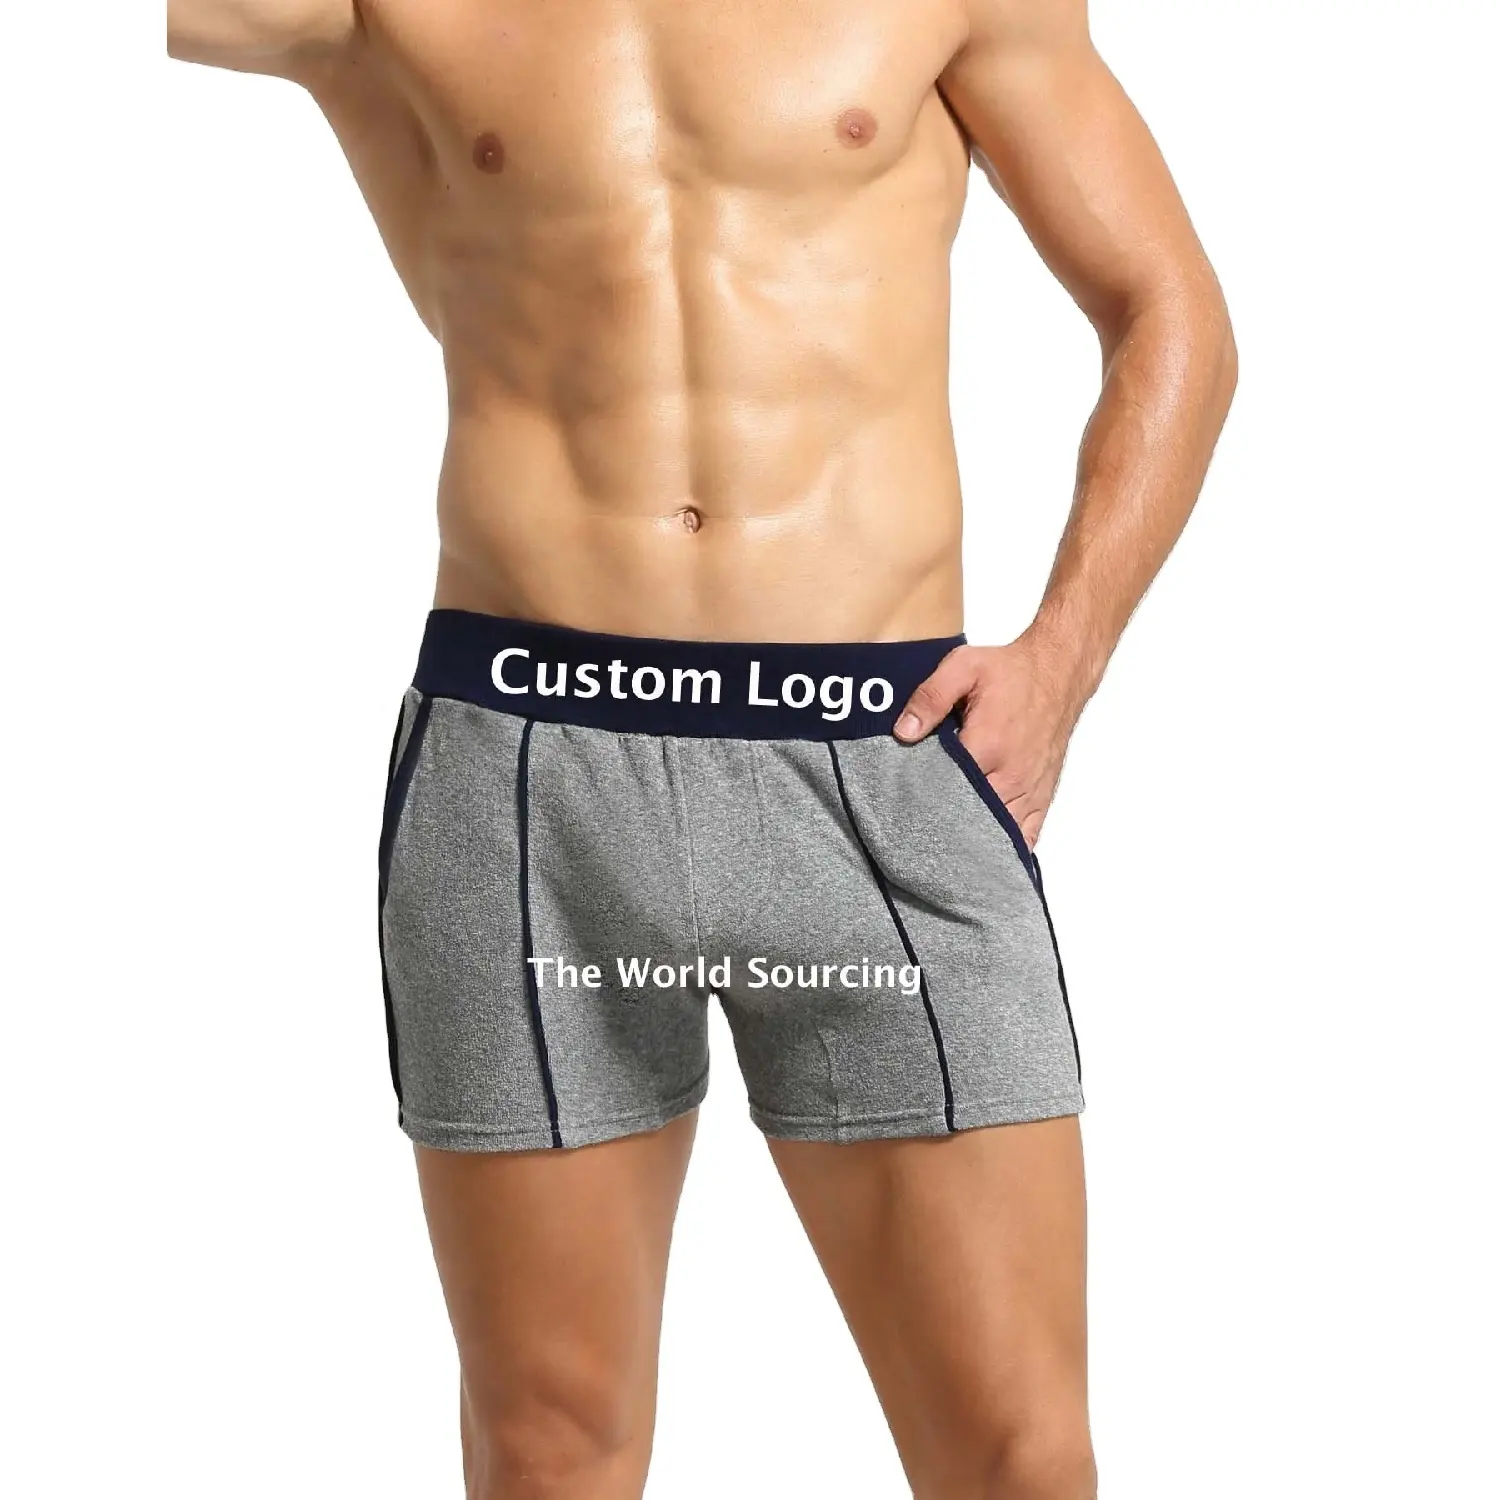 High Quality Men's Boxer Shorts Underwear 100% Cotton Short Sexy look Men's Boxer Online Market Best Selling Export From BD